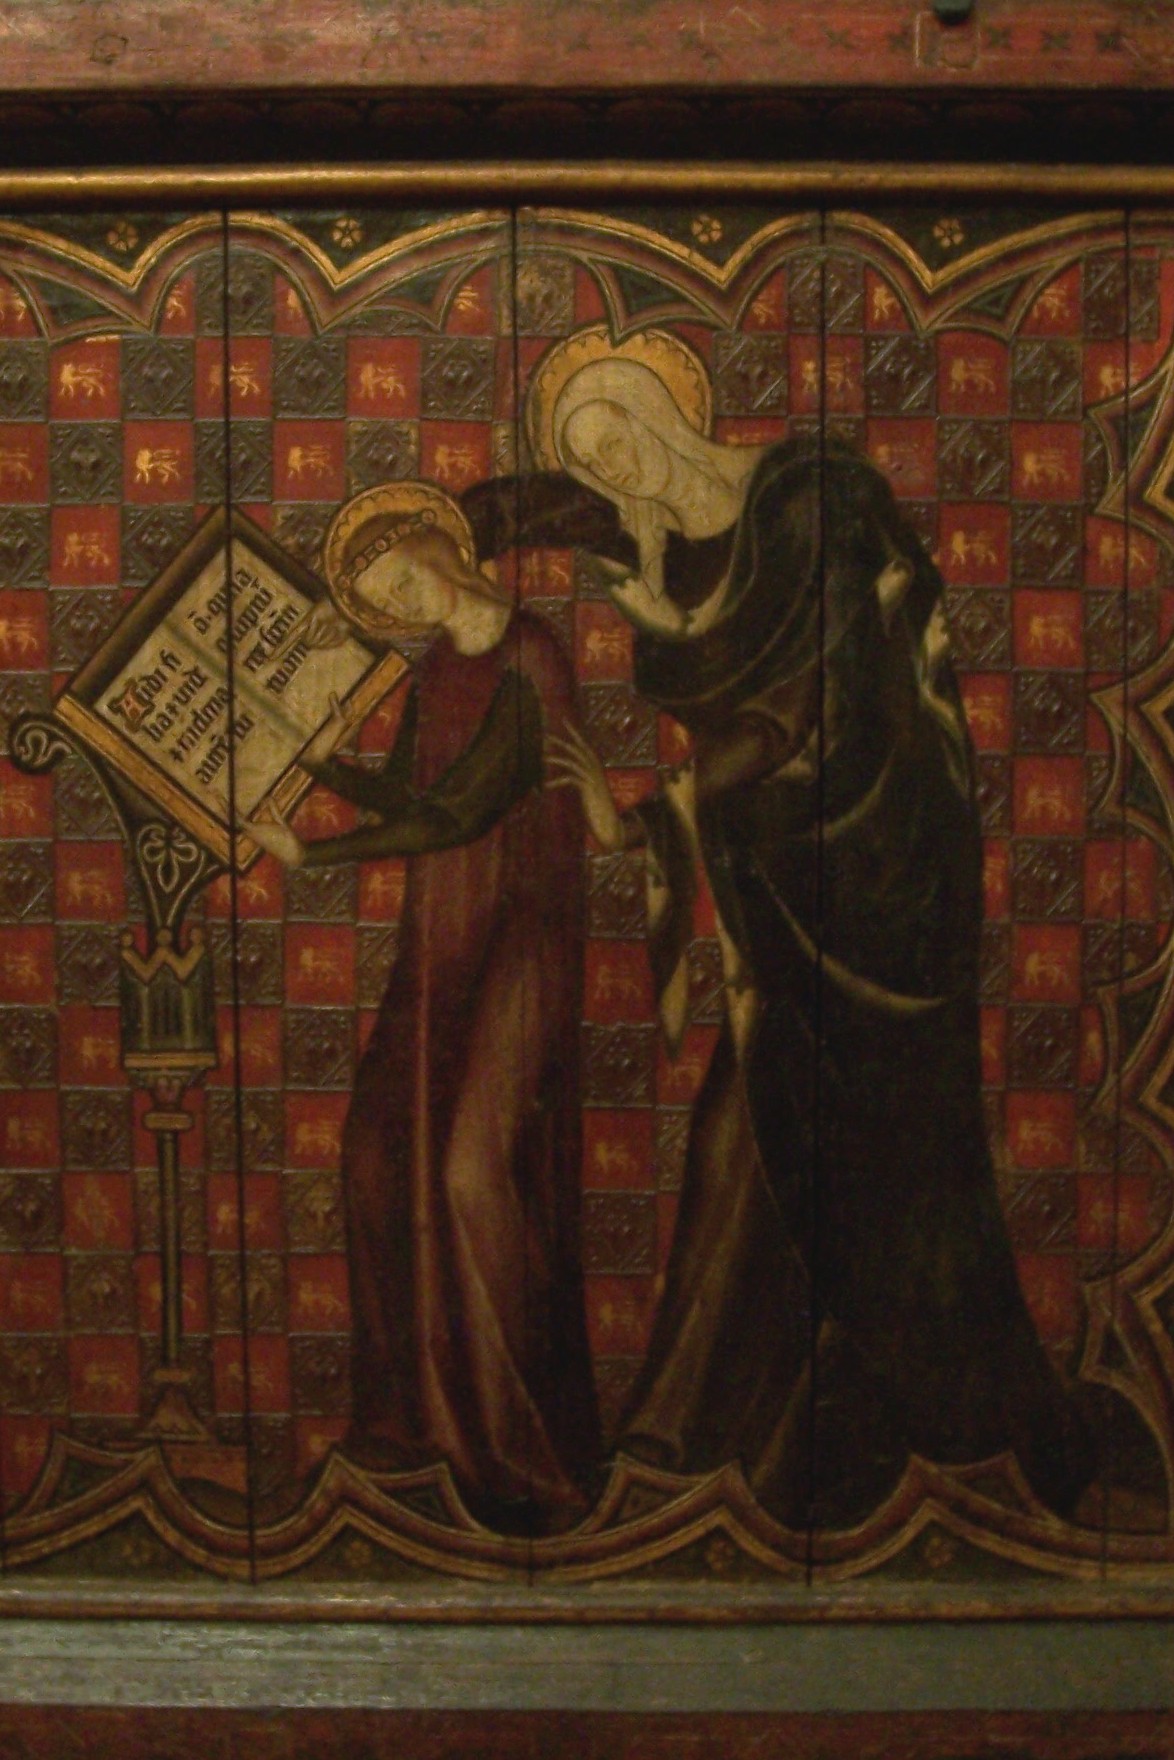 Education of Mary by her mother Anna.